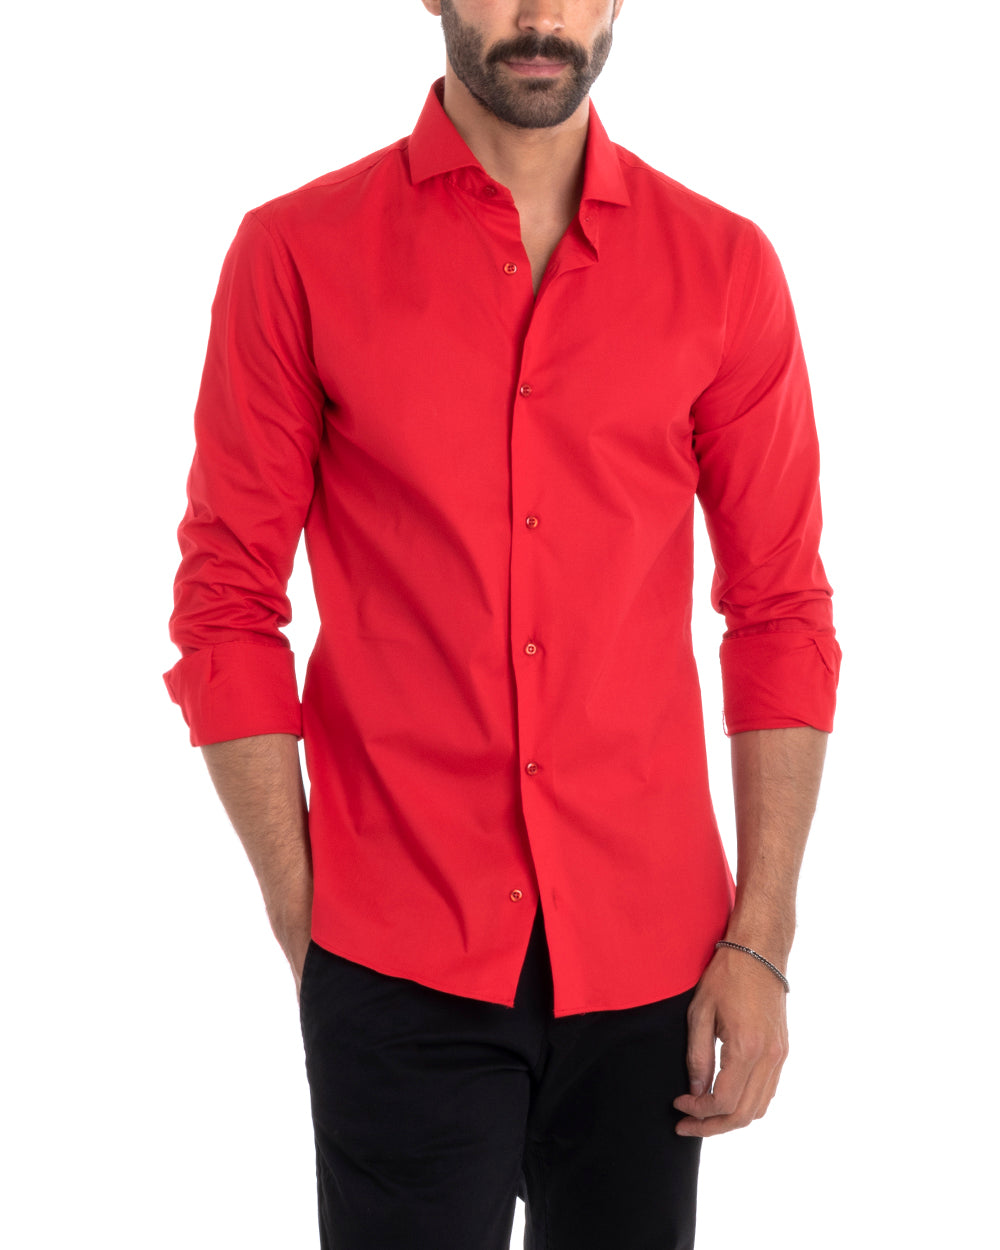 Men's Tailored Shirt With Collar Long Sleeve Basic Soft Cotton Red Regular Fit GIOSAL-C2397A